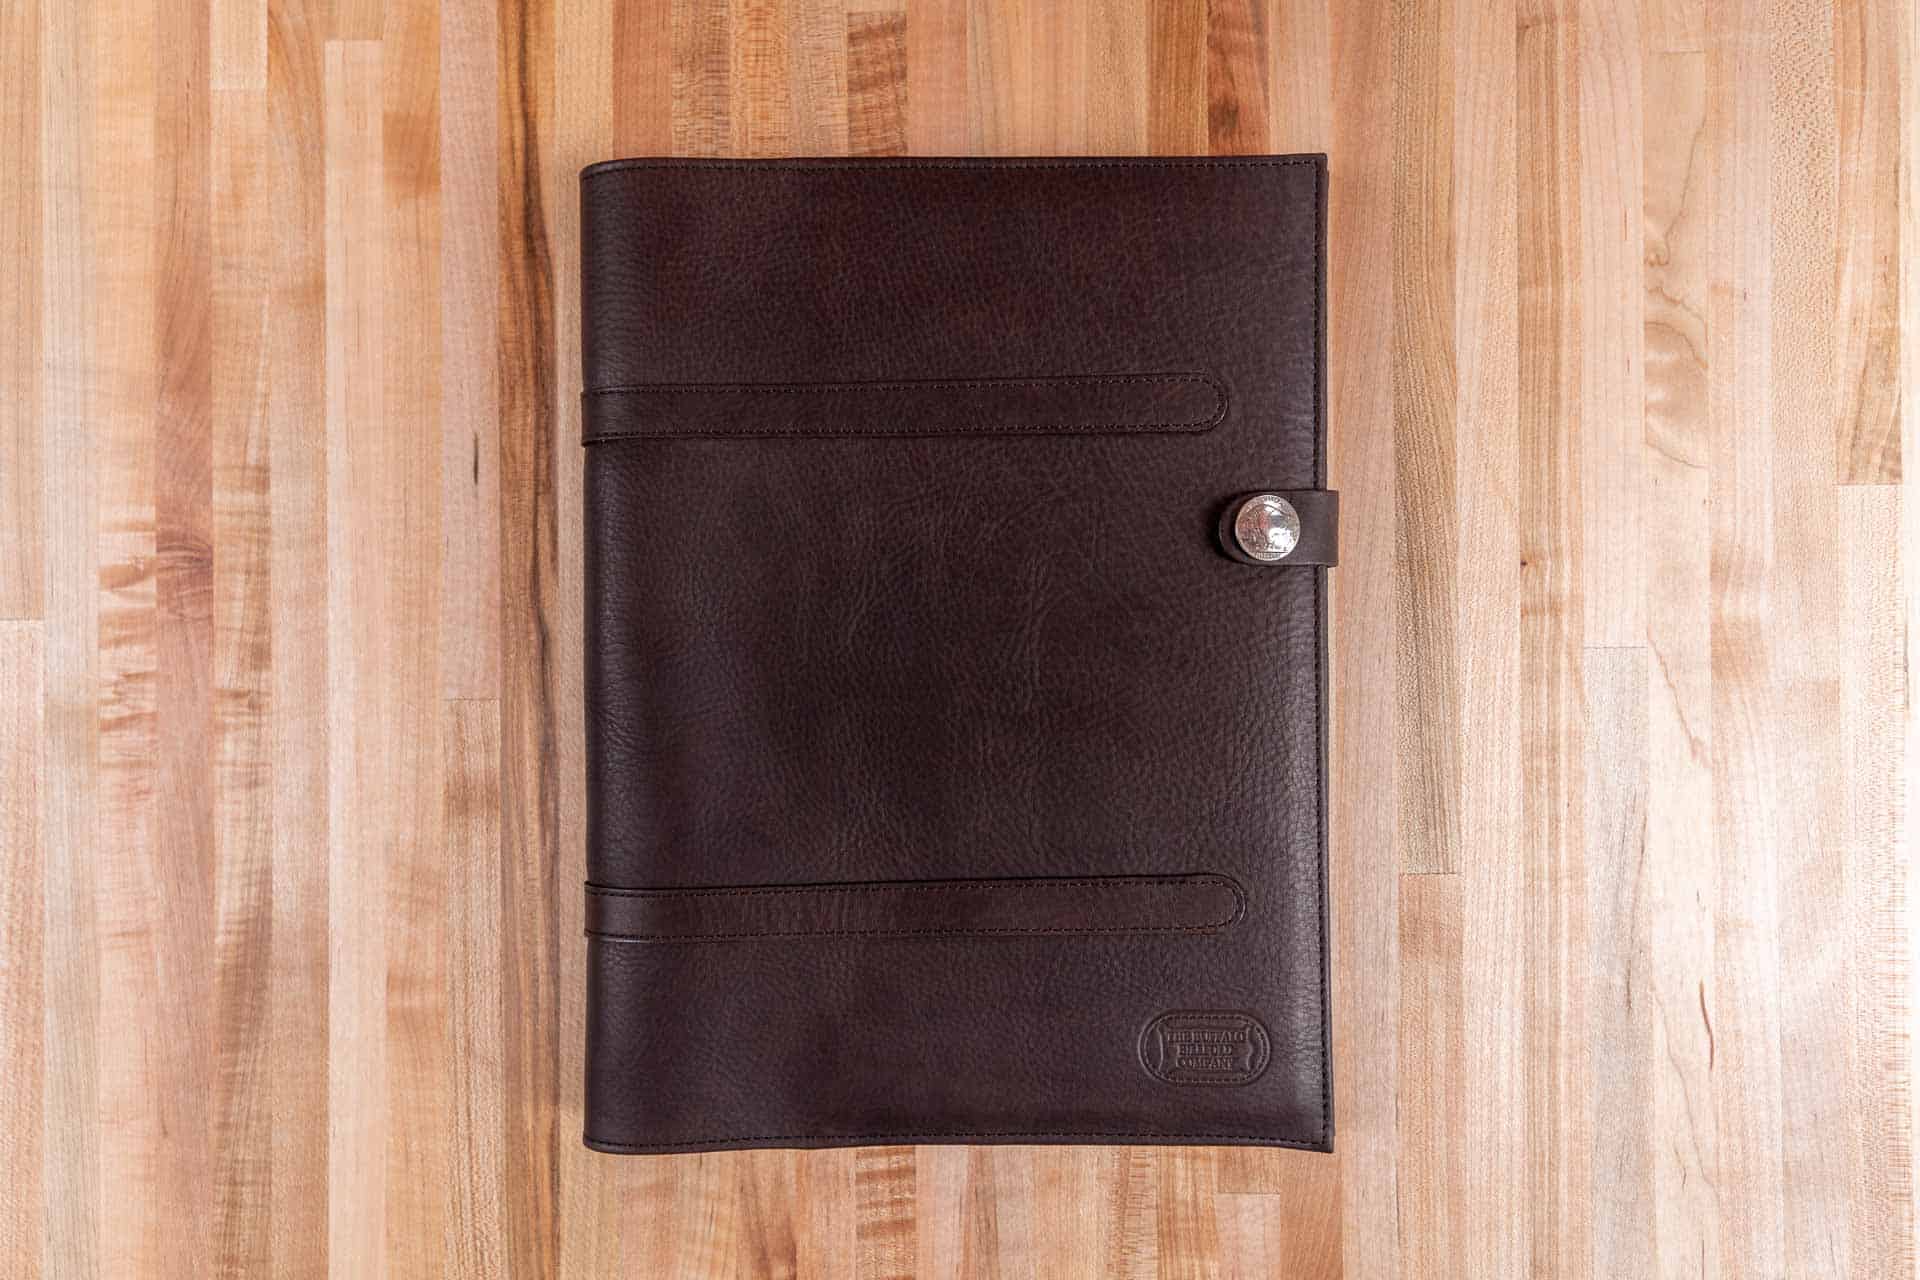 Bespoke Hand Stitched Pad Cover | English Bridle Hide | Portfolio for Legal  Pad | Custom Made in England